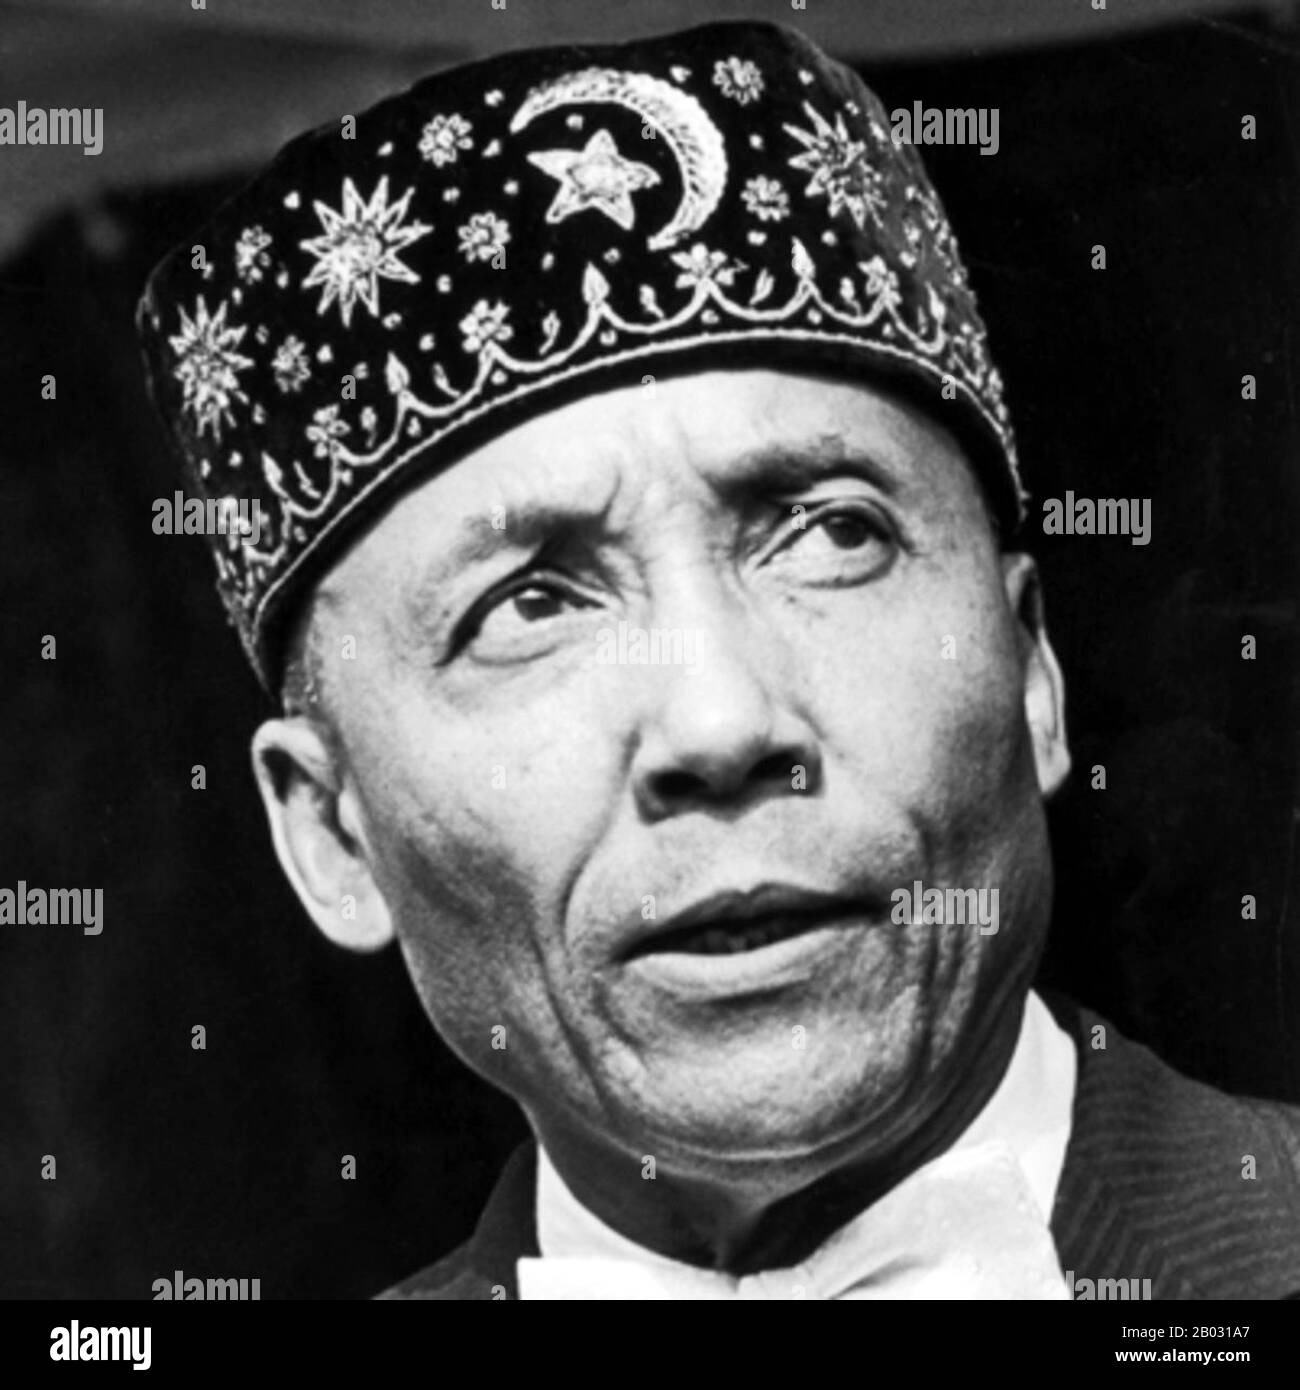 Elijah Muhammad, son of a sharecropper, was born into poverty in Sandersville, Georgia, on October 7, 1897. After moving to Detroit in 1923, he met W. D. Fard, founder of the black separatist movement Nation of Islam.  Muhammad became Fard’s successor from 1934-75 and was known for his controversial preaching. His followers included Malcolm X and Louis Farrakhan. He died February 25, 1975, in Chicago. Stock Photo